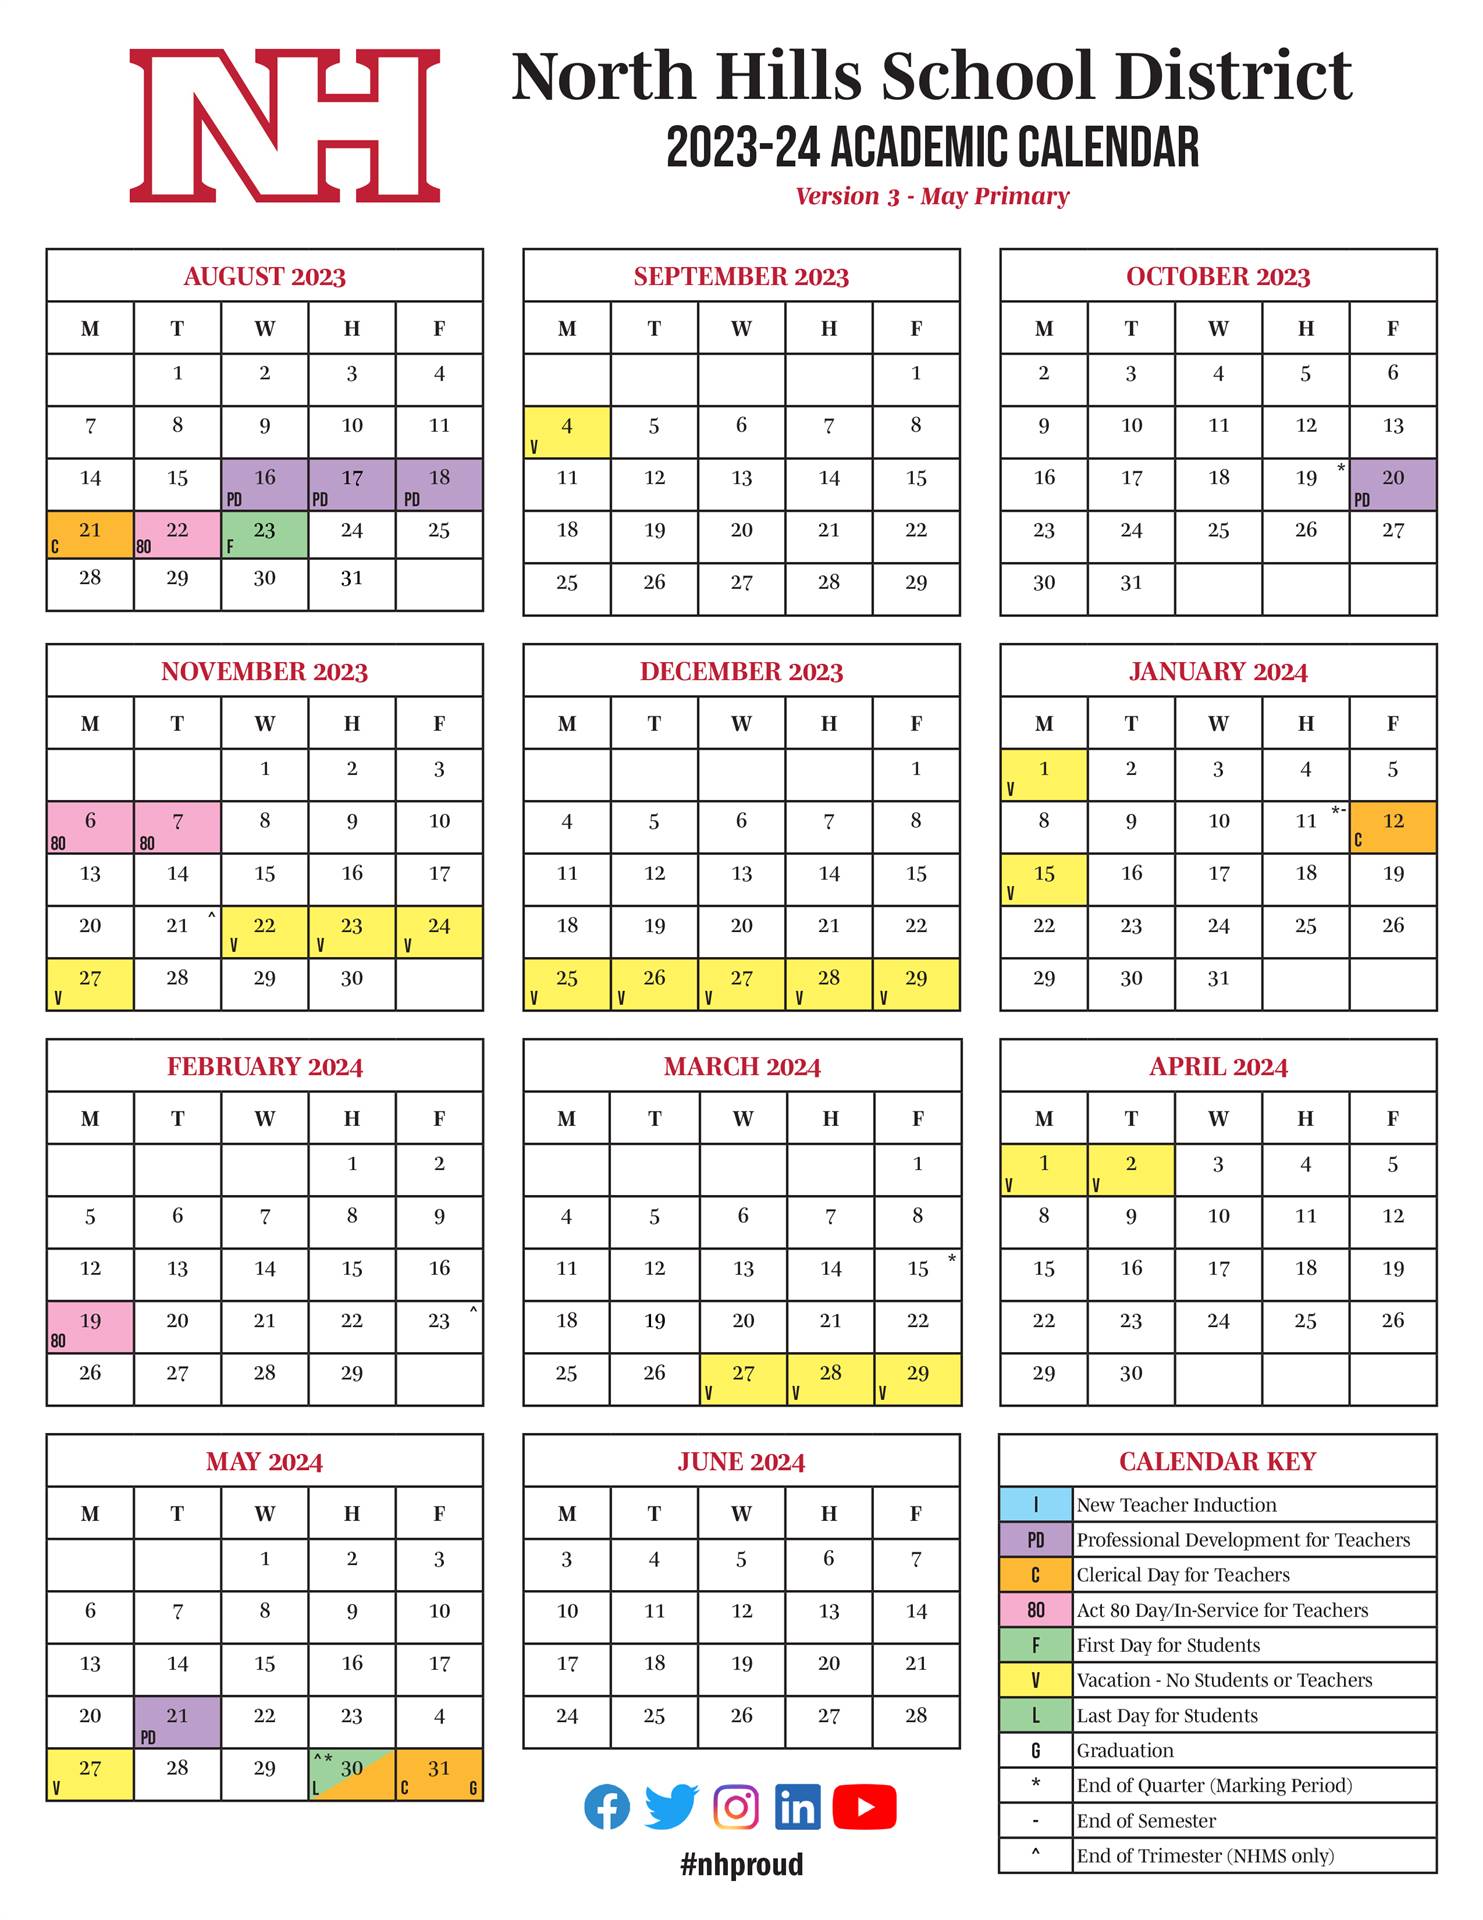 2023-24 Academic Calendar with May Primary Election Day